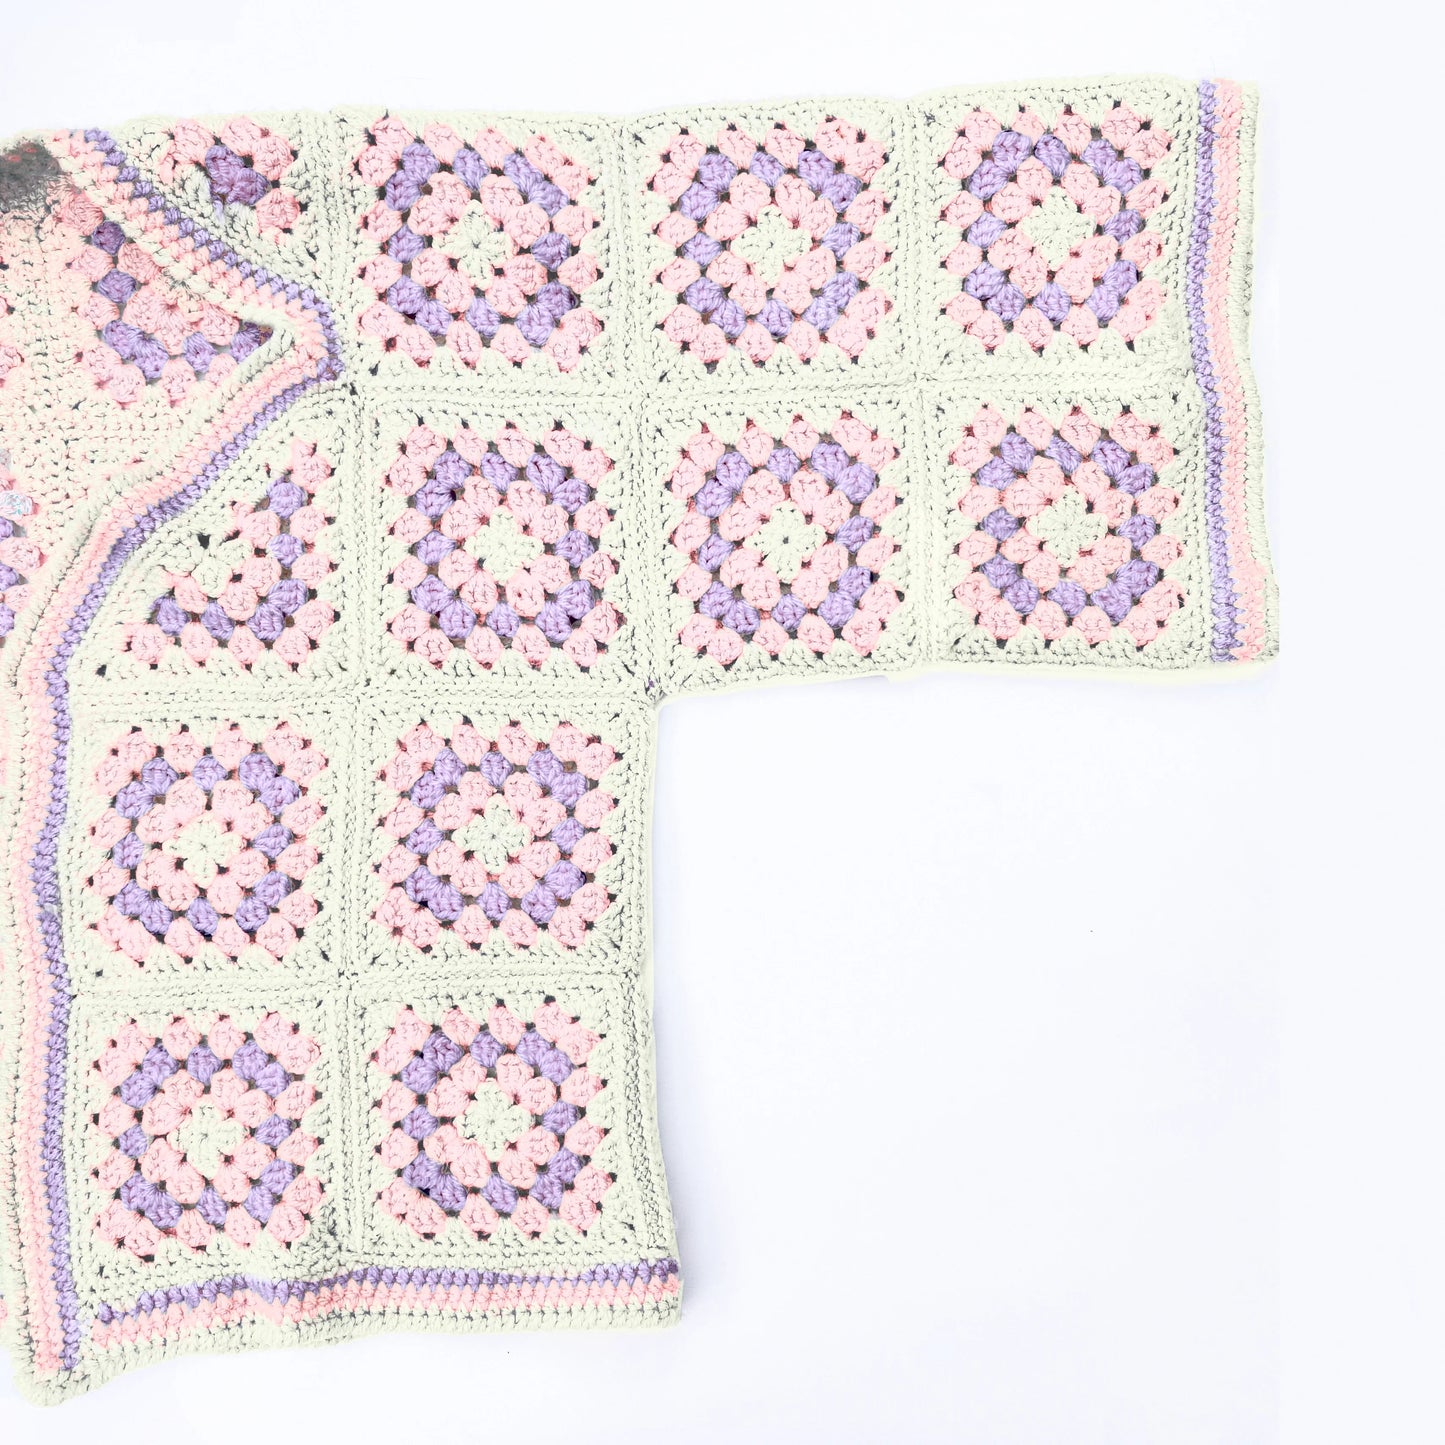 Granny Squares for Beginners Crochet Workshop, Thatcham, 16th March